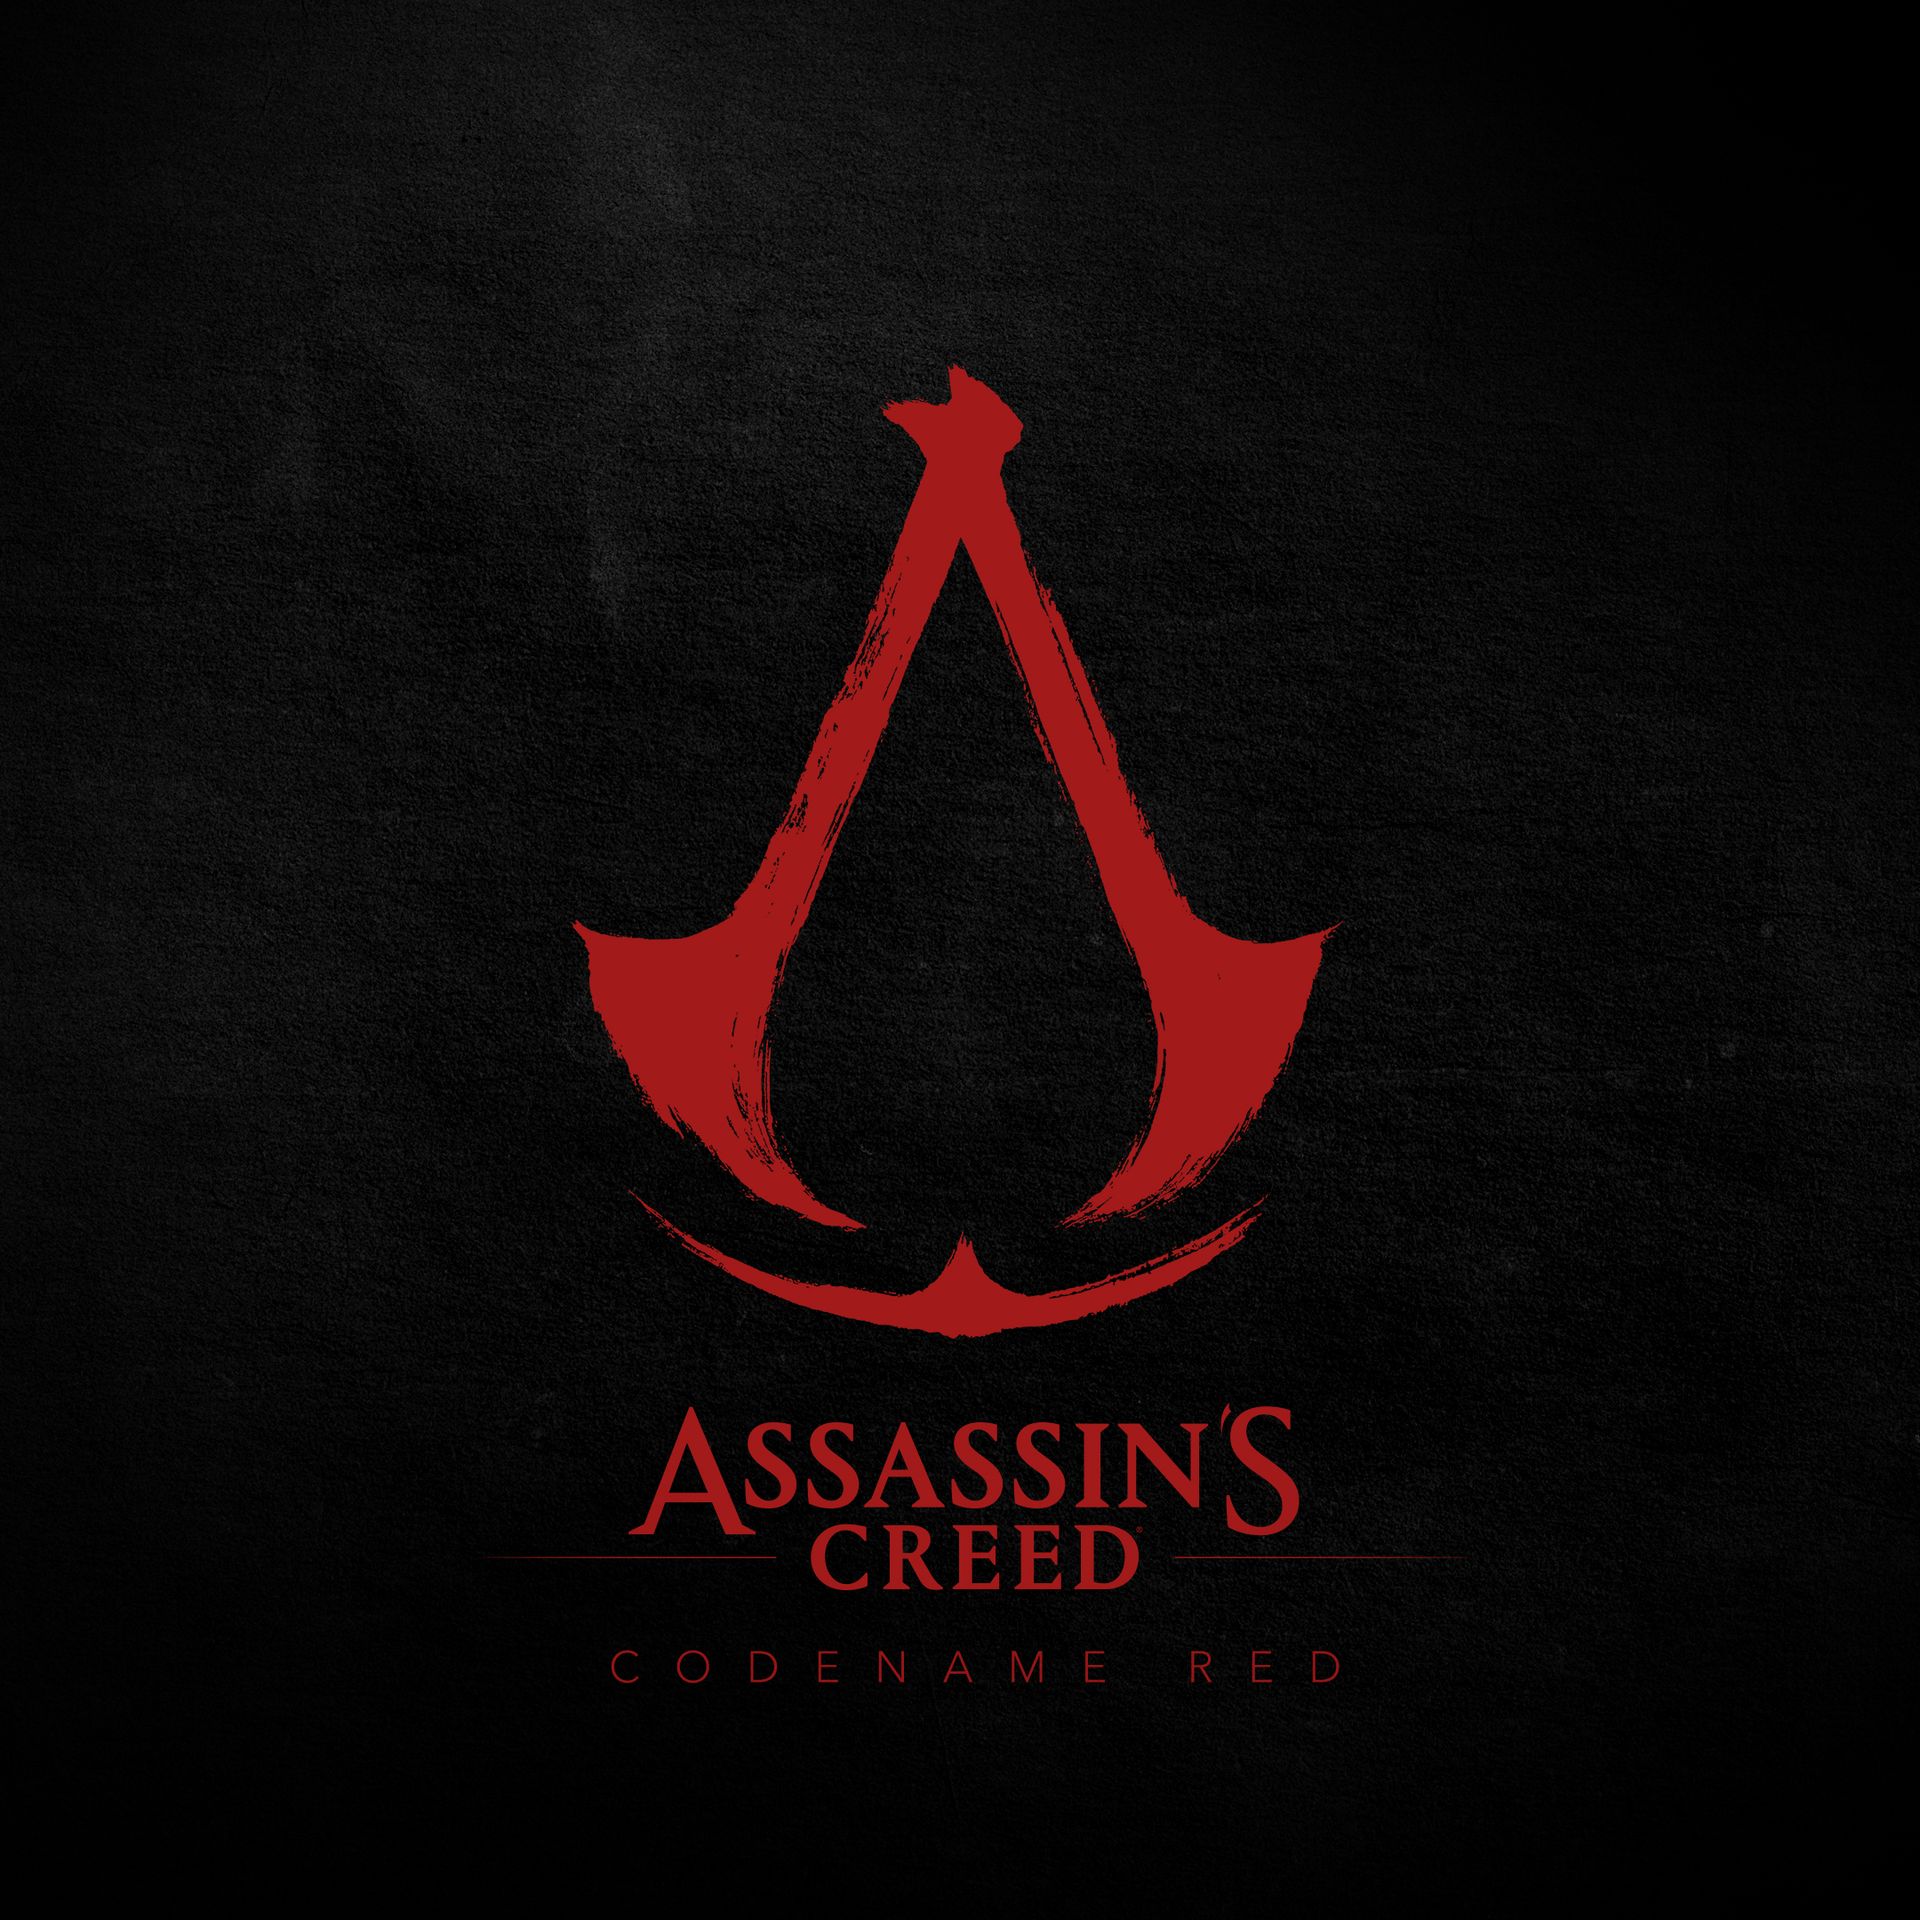 Assassin's Creed Red Release Date CONFIRMED 